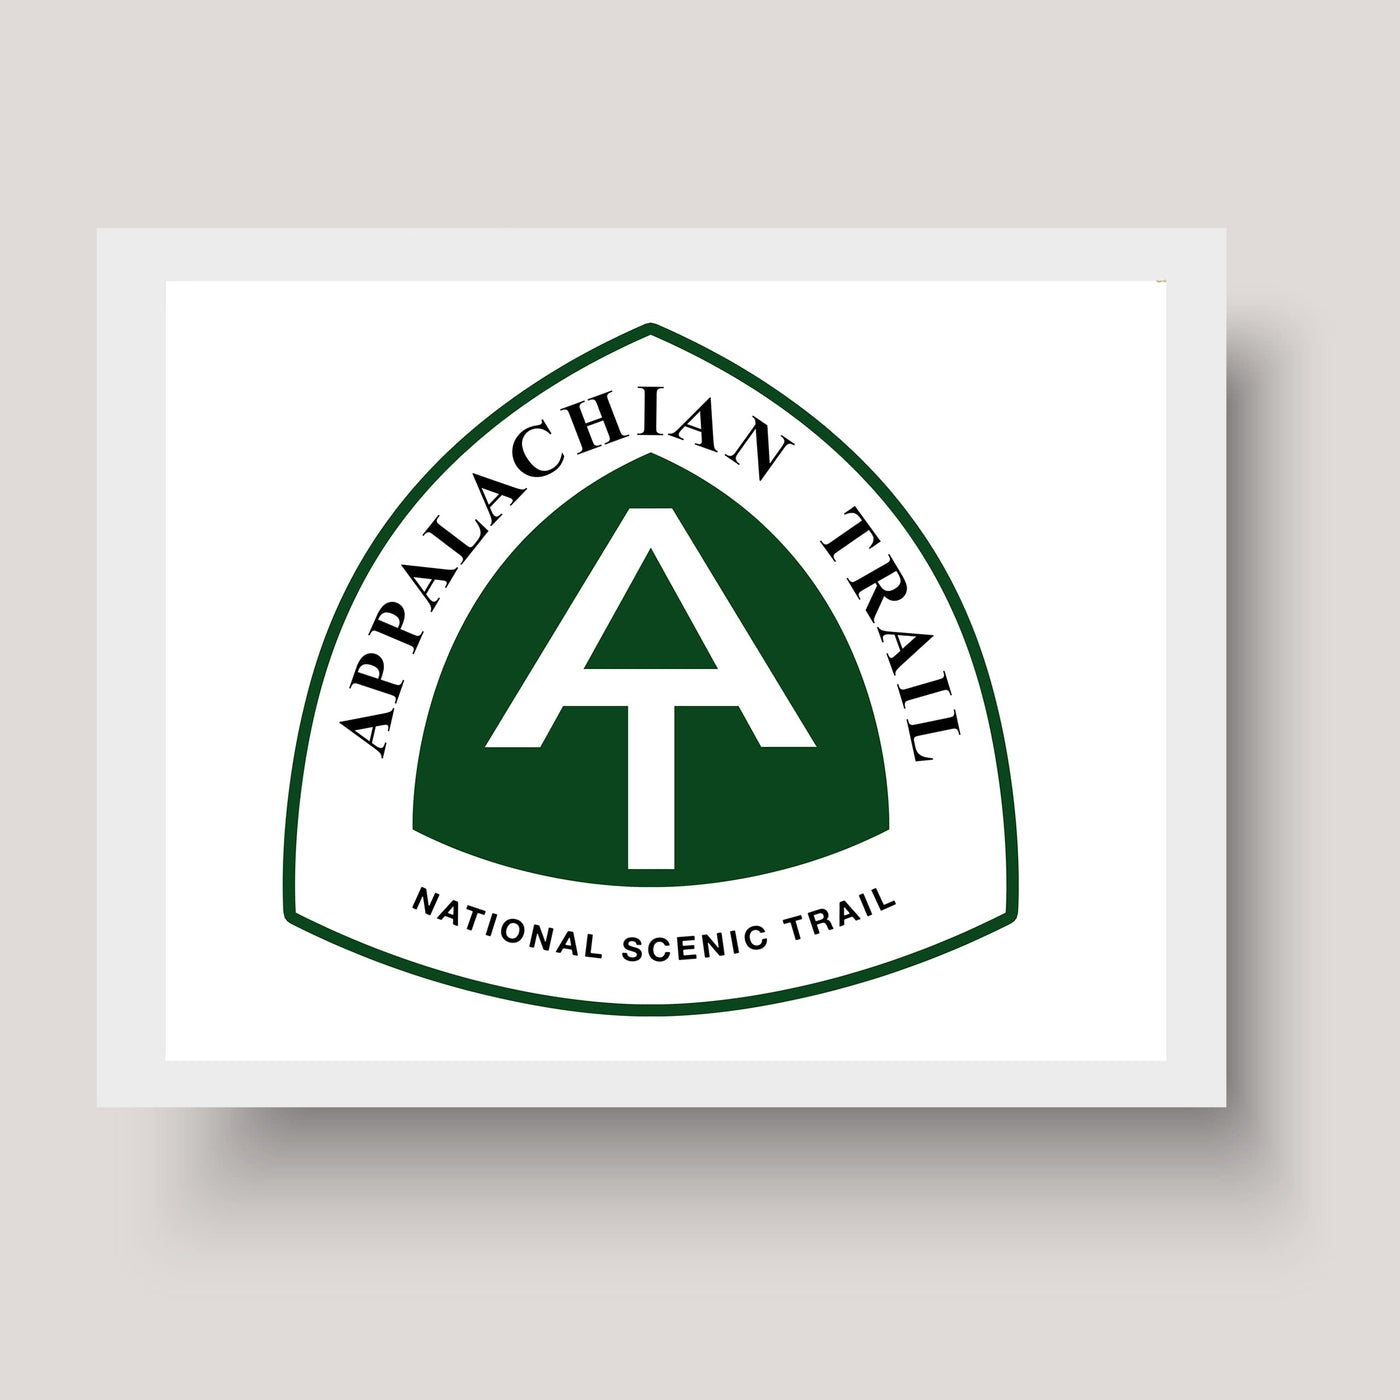 Appalachian Trail-Rustic National Park Wall Decor Sign - 10 x 8" Scenic Hiking & Outdoors Wall Art Print -Ready to Frame. Perfect Adventure Sign for Home-Office-Cabin-Lodge-Lake House Decor!